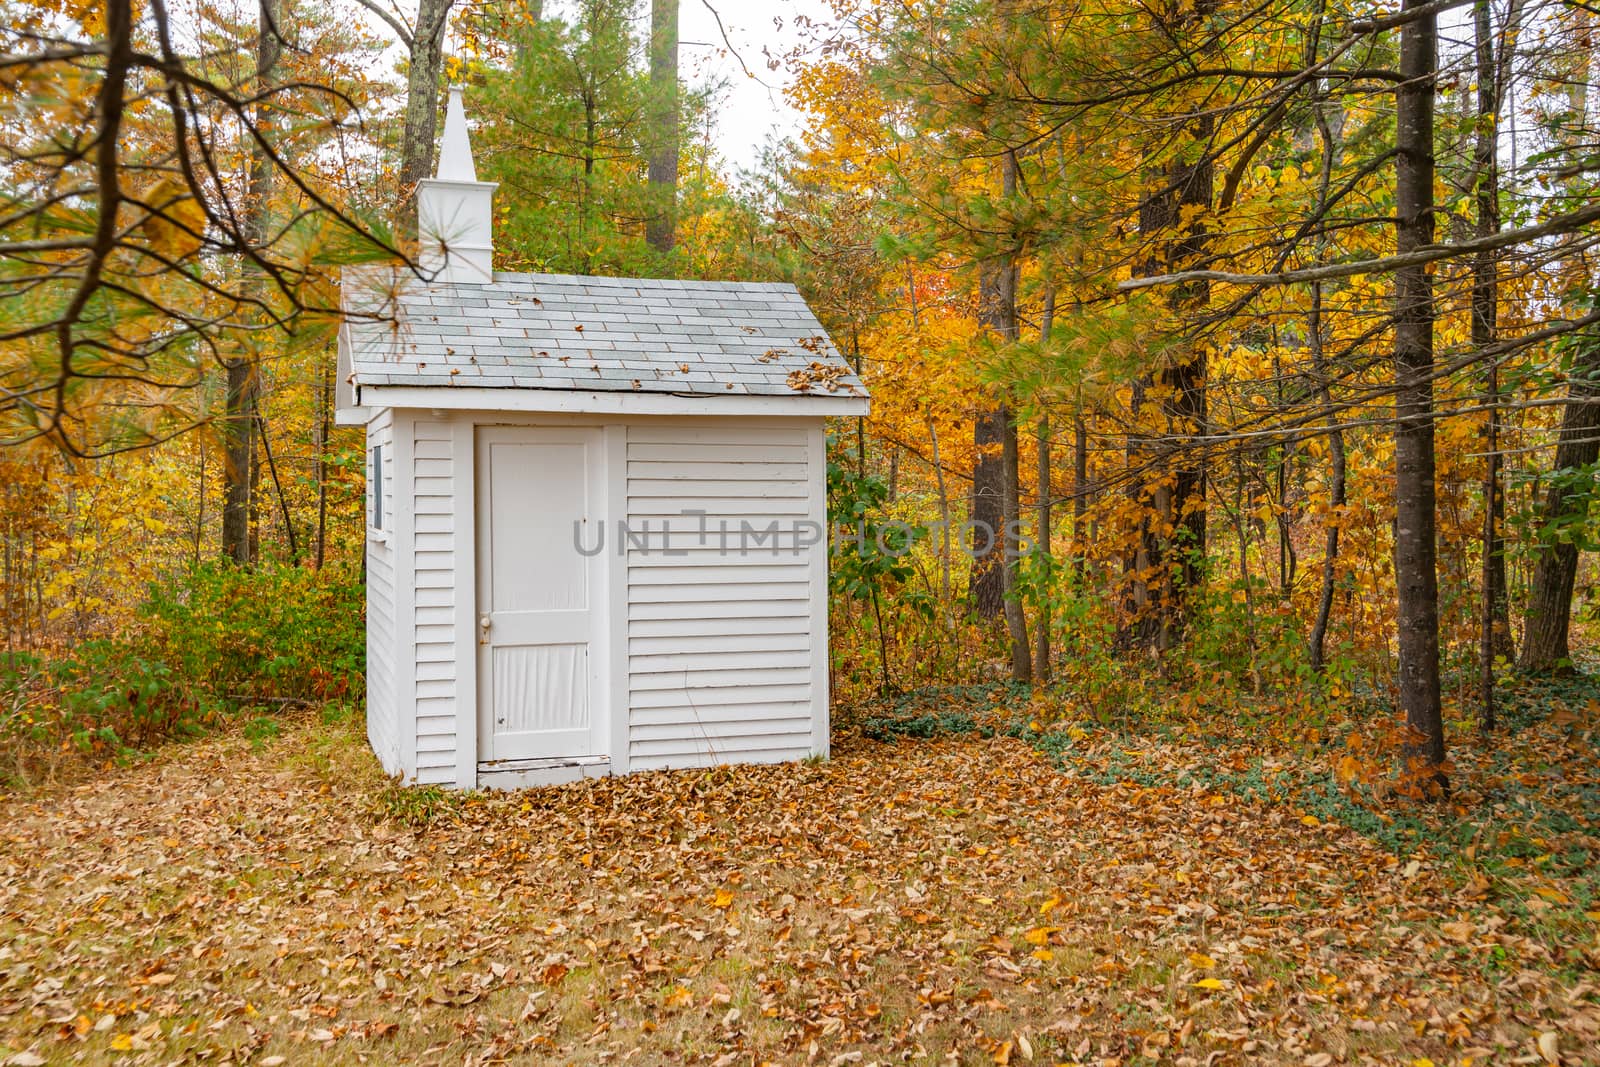 Small white wooden building standing among trees in autumn color by brians101